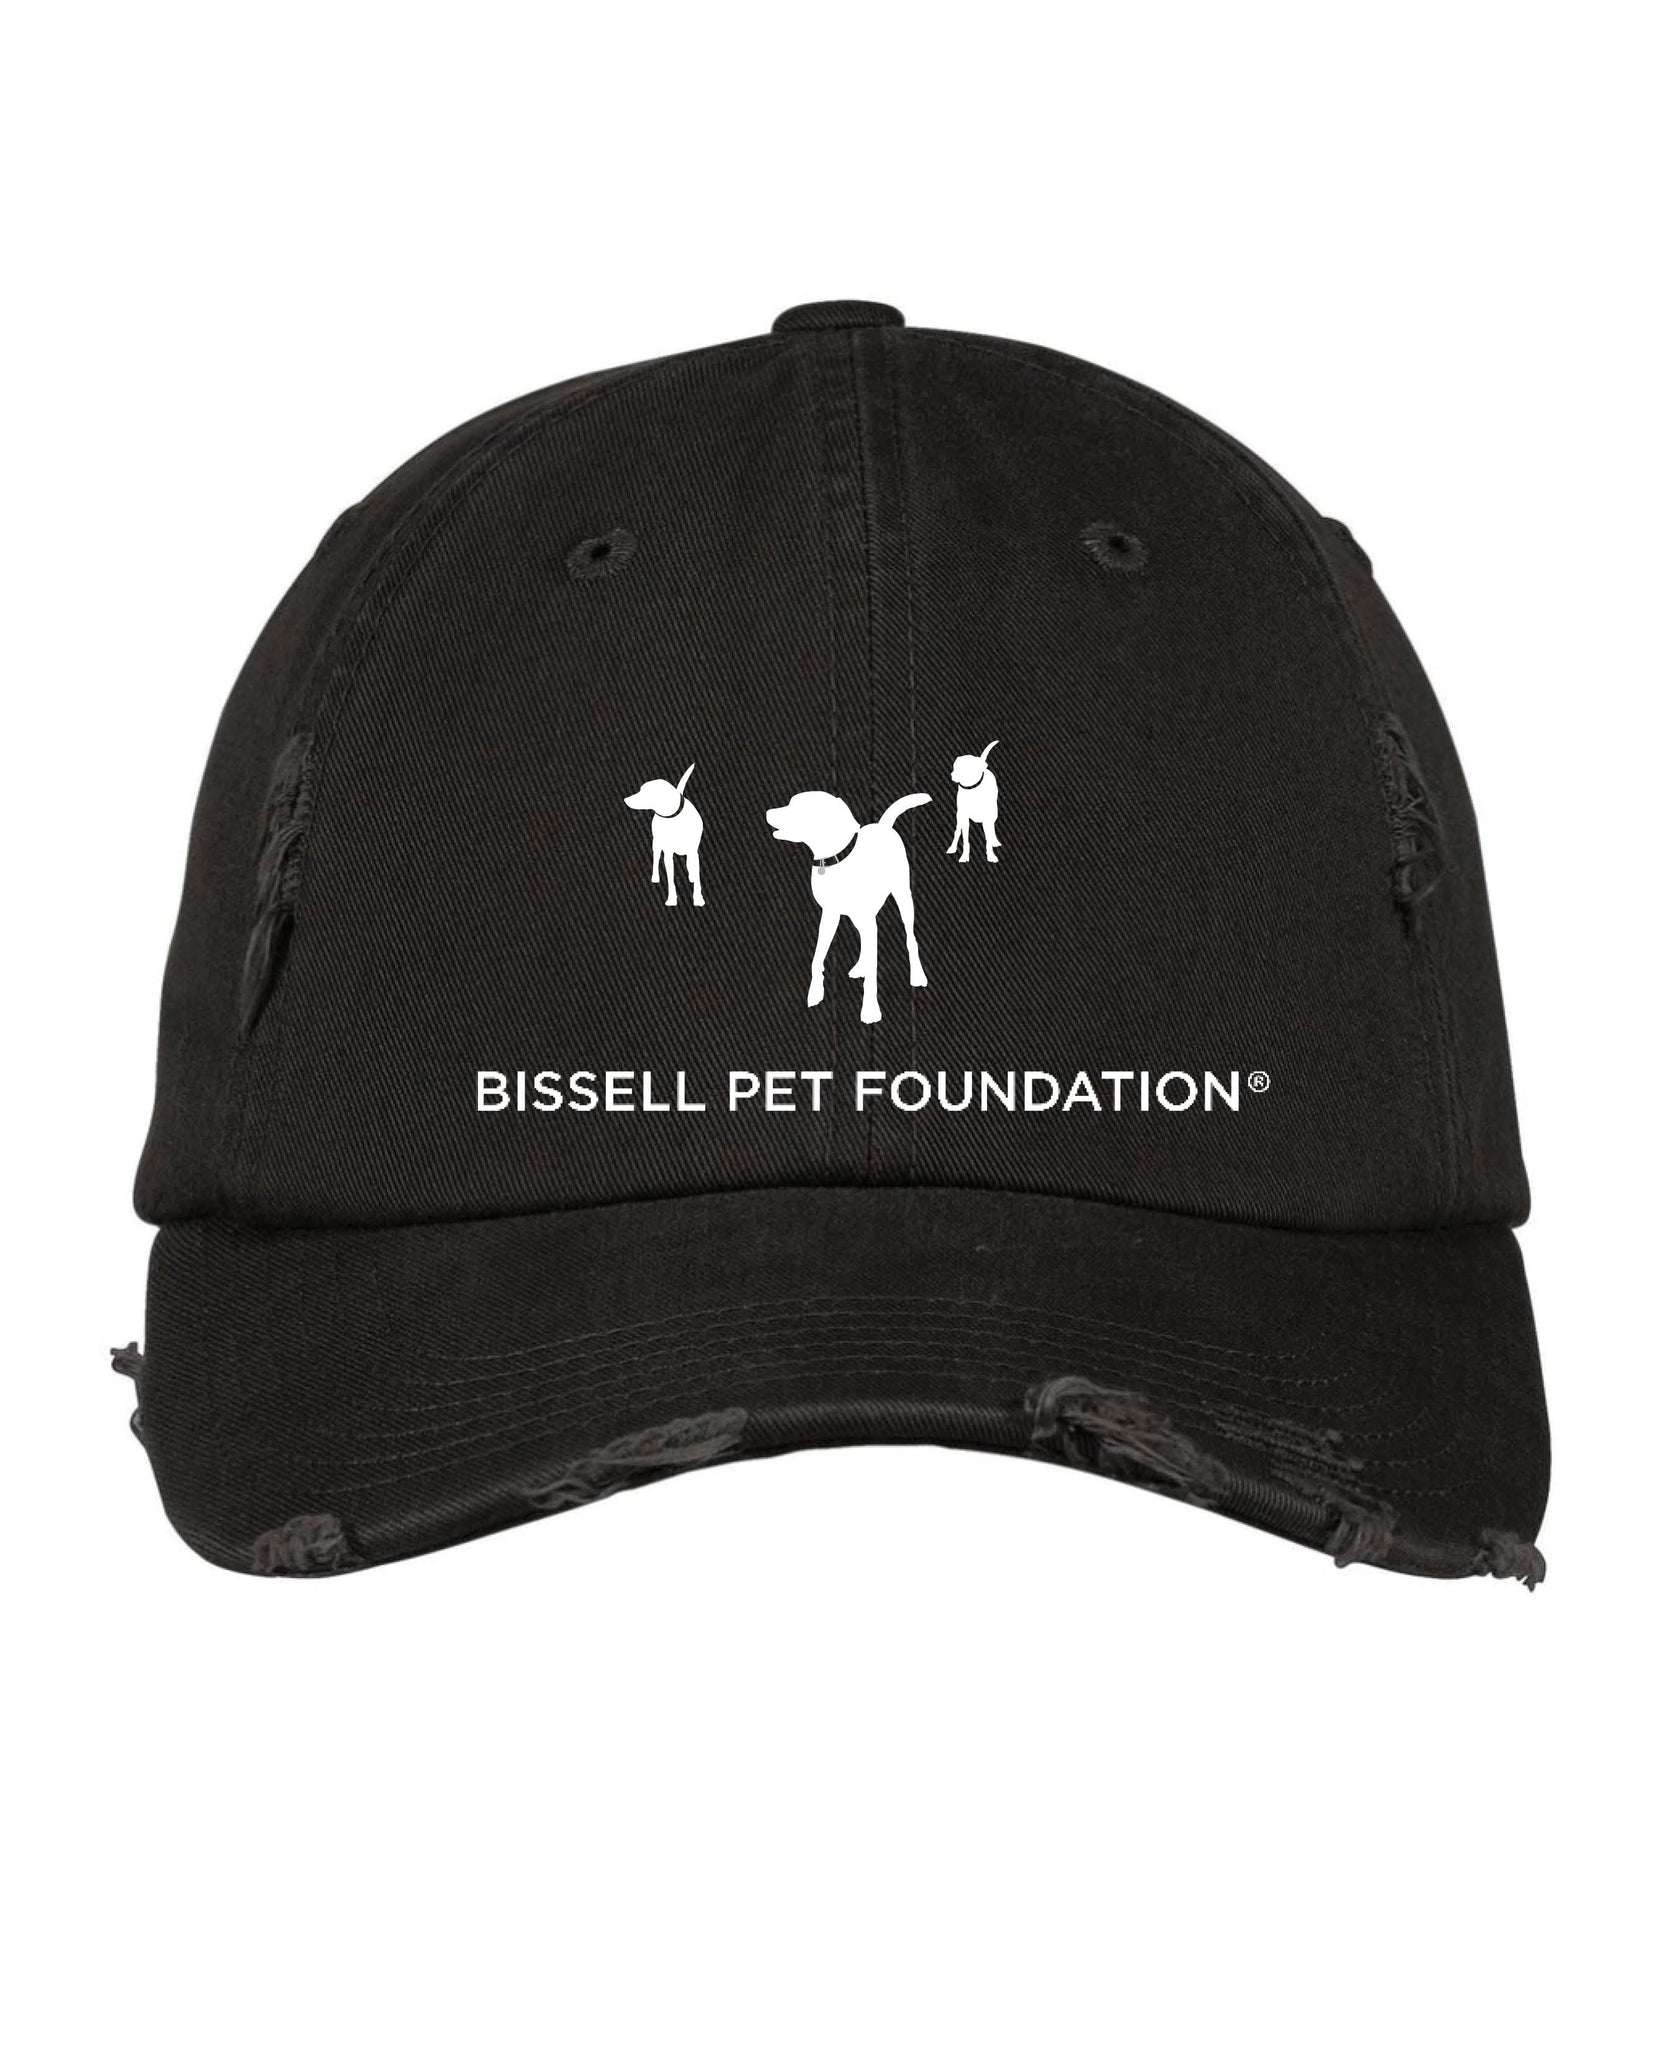 Black hat with BISSELL Pet Foundation logo on front and "Until every pet has a home" on back